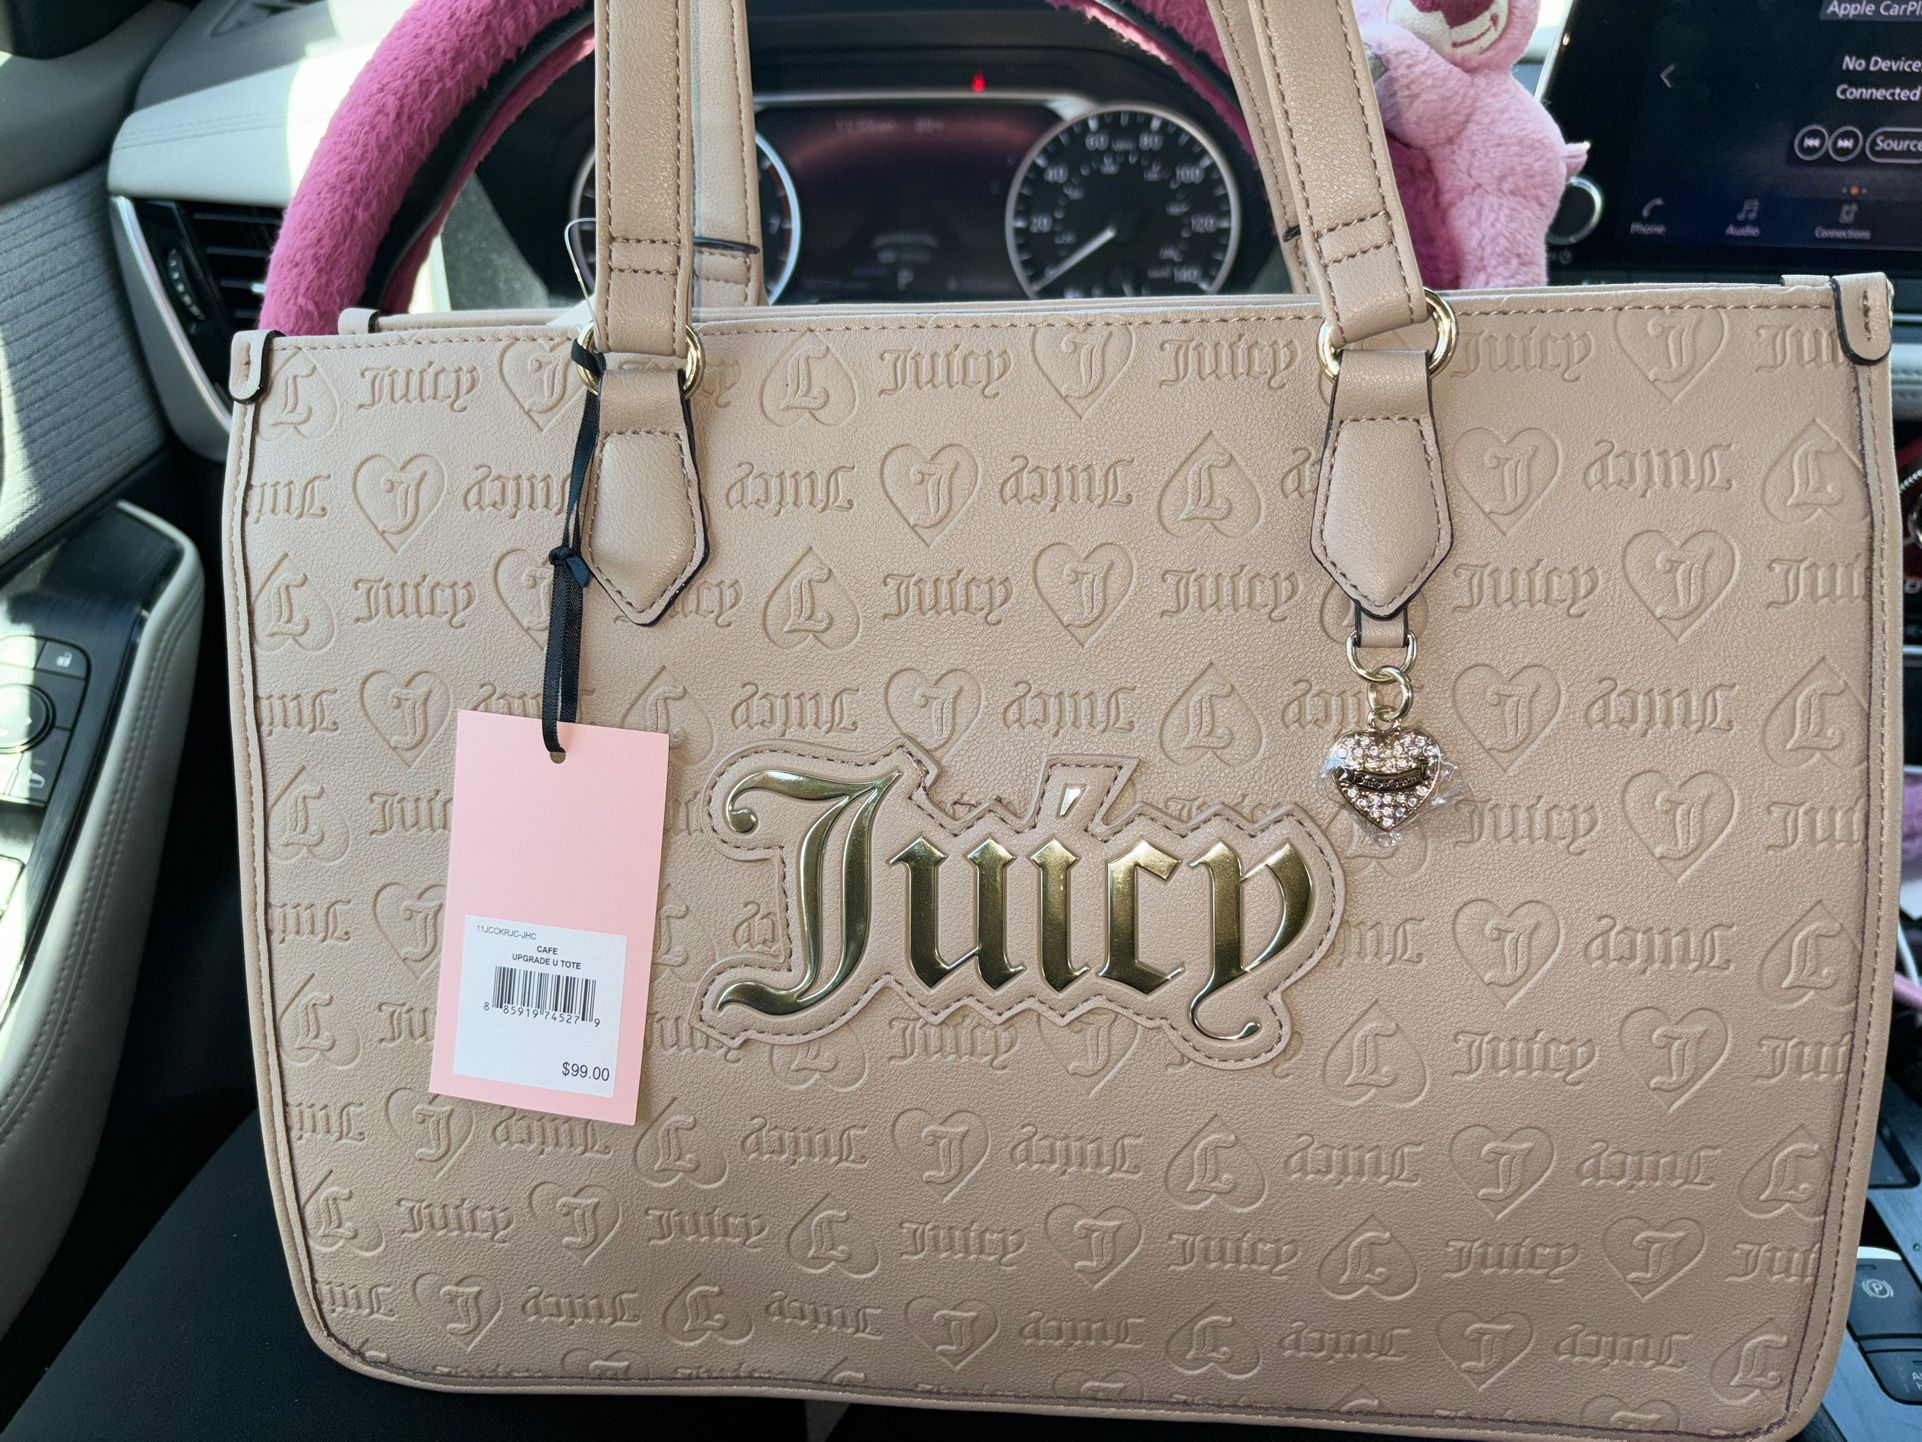 Juicy Couture Cafe Tote Bag